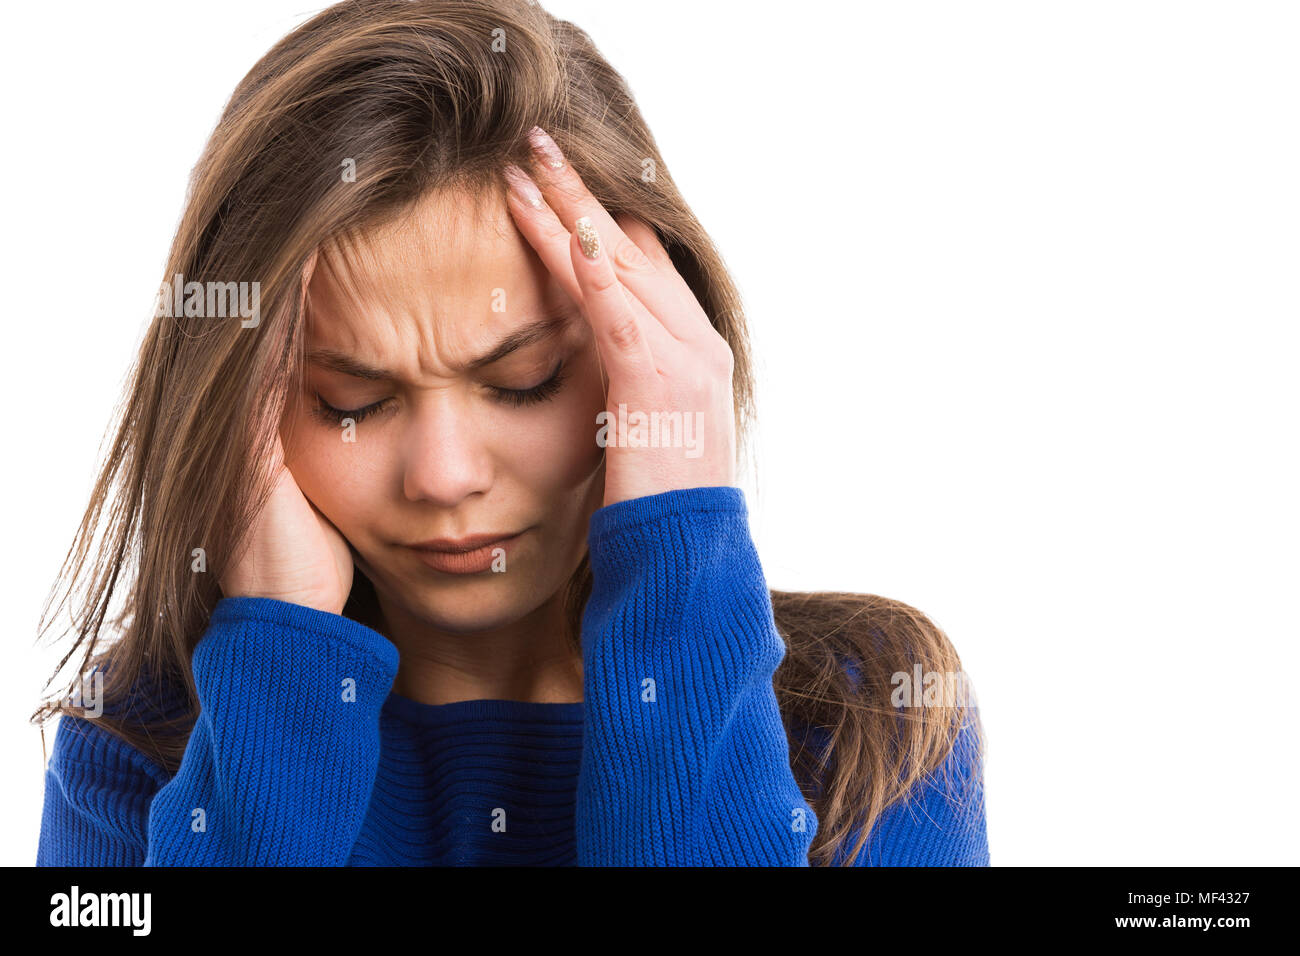 Young woman suffering head ache rubbing painful temples with hands as stress tension problem concept isolated on white background Stock Photo